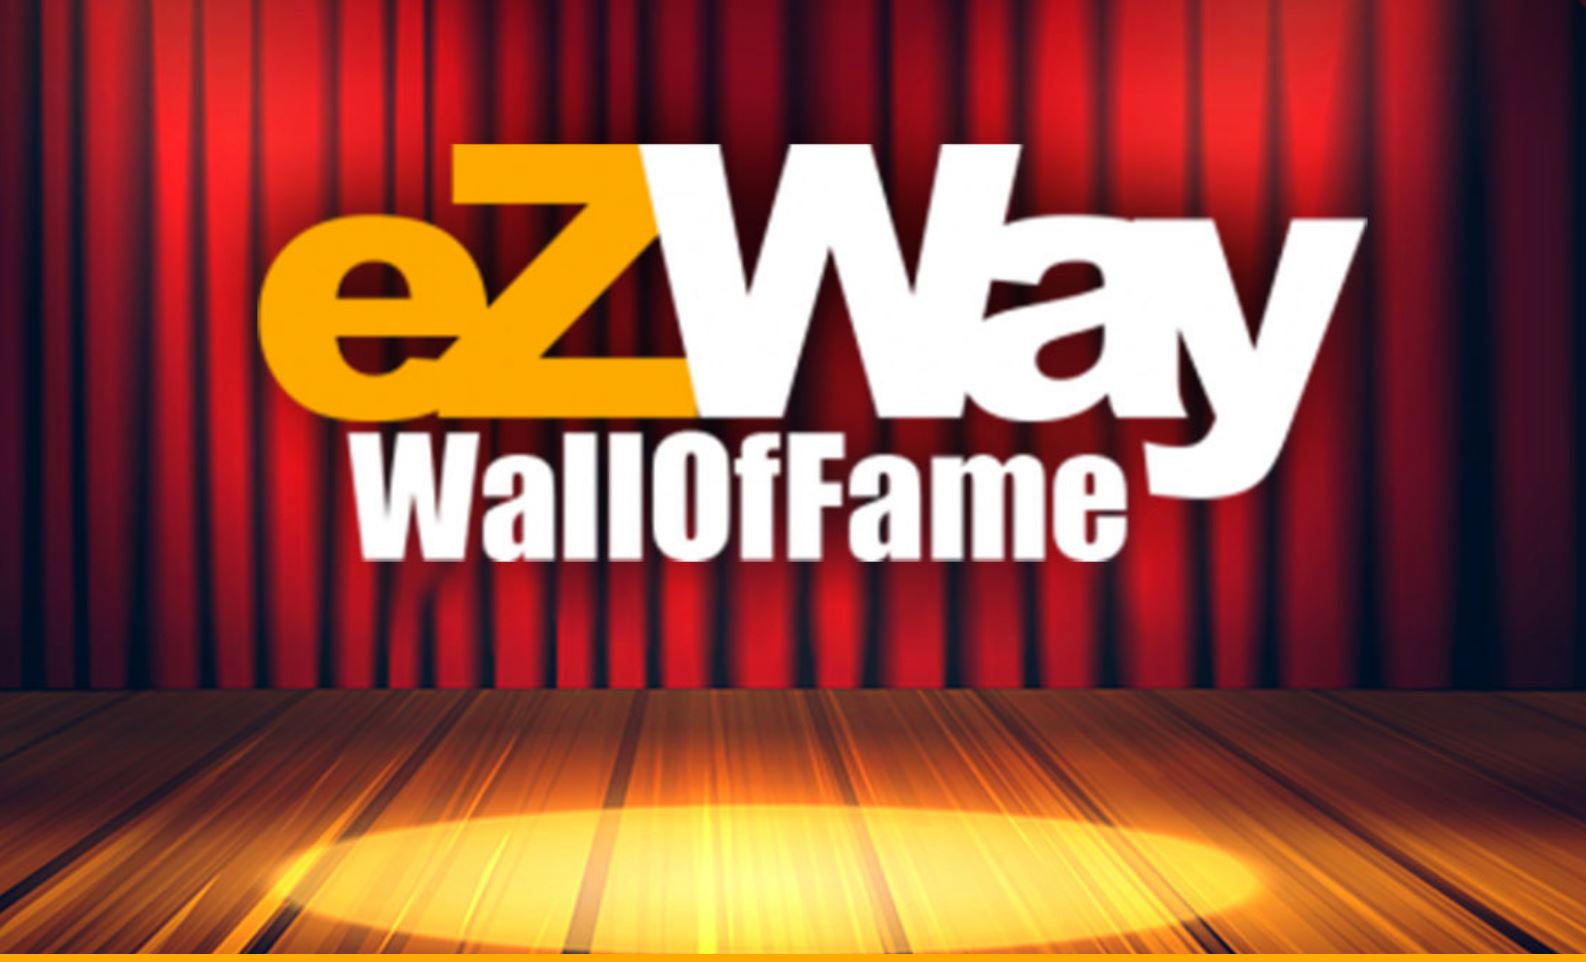 eZWay wall of fame